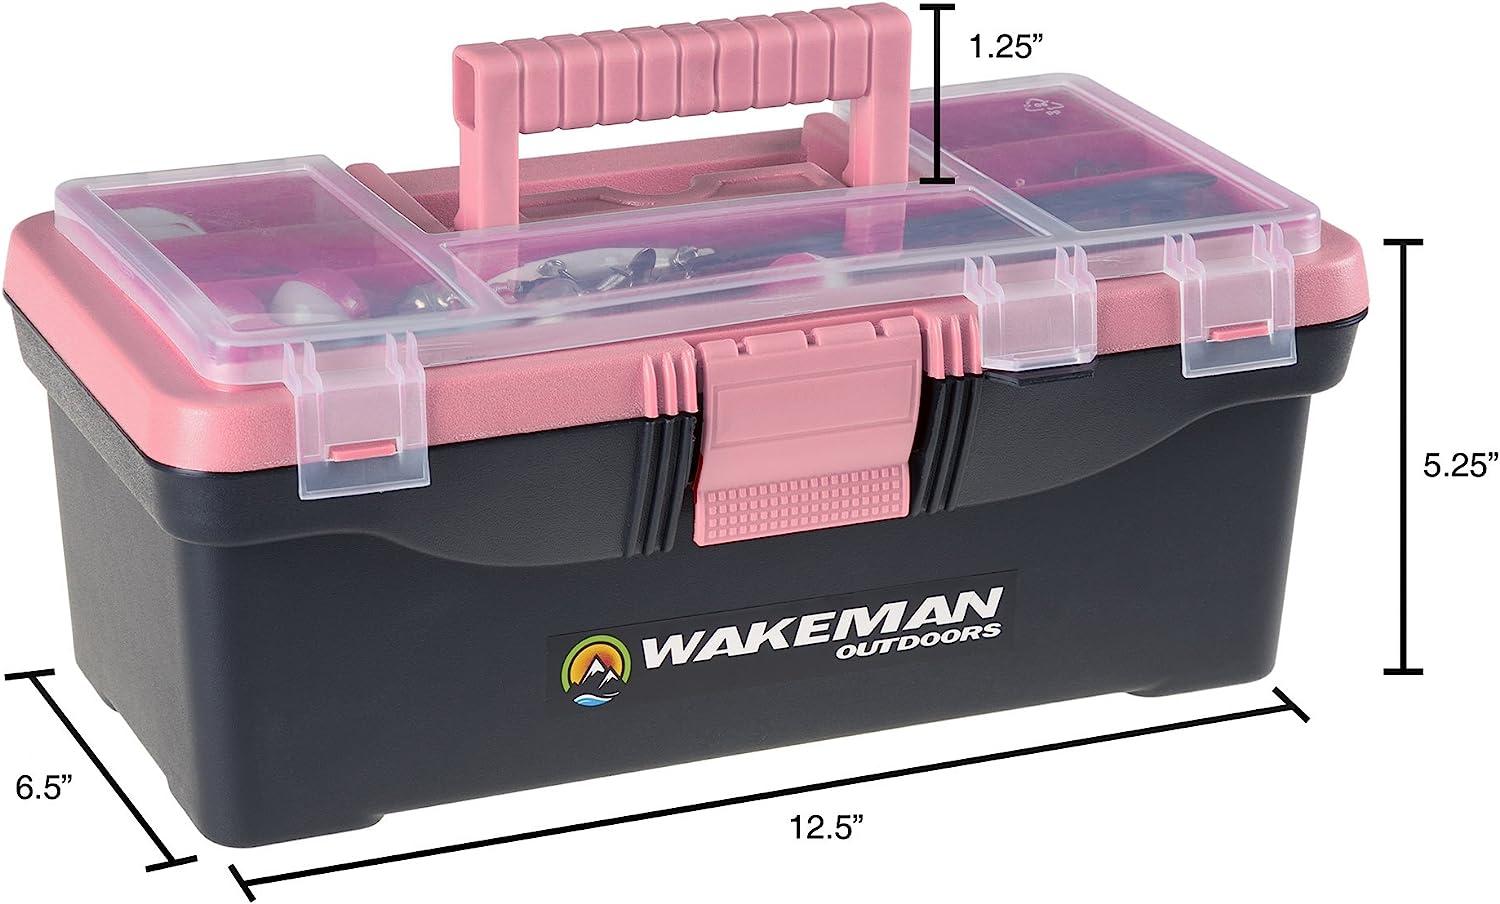 Fishing Single Tray Tackle Box- 55 Piece Tackle Gear Kit Includes Sinkers  Pink